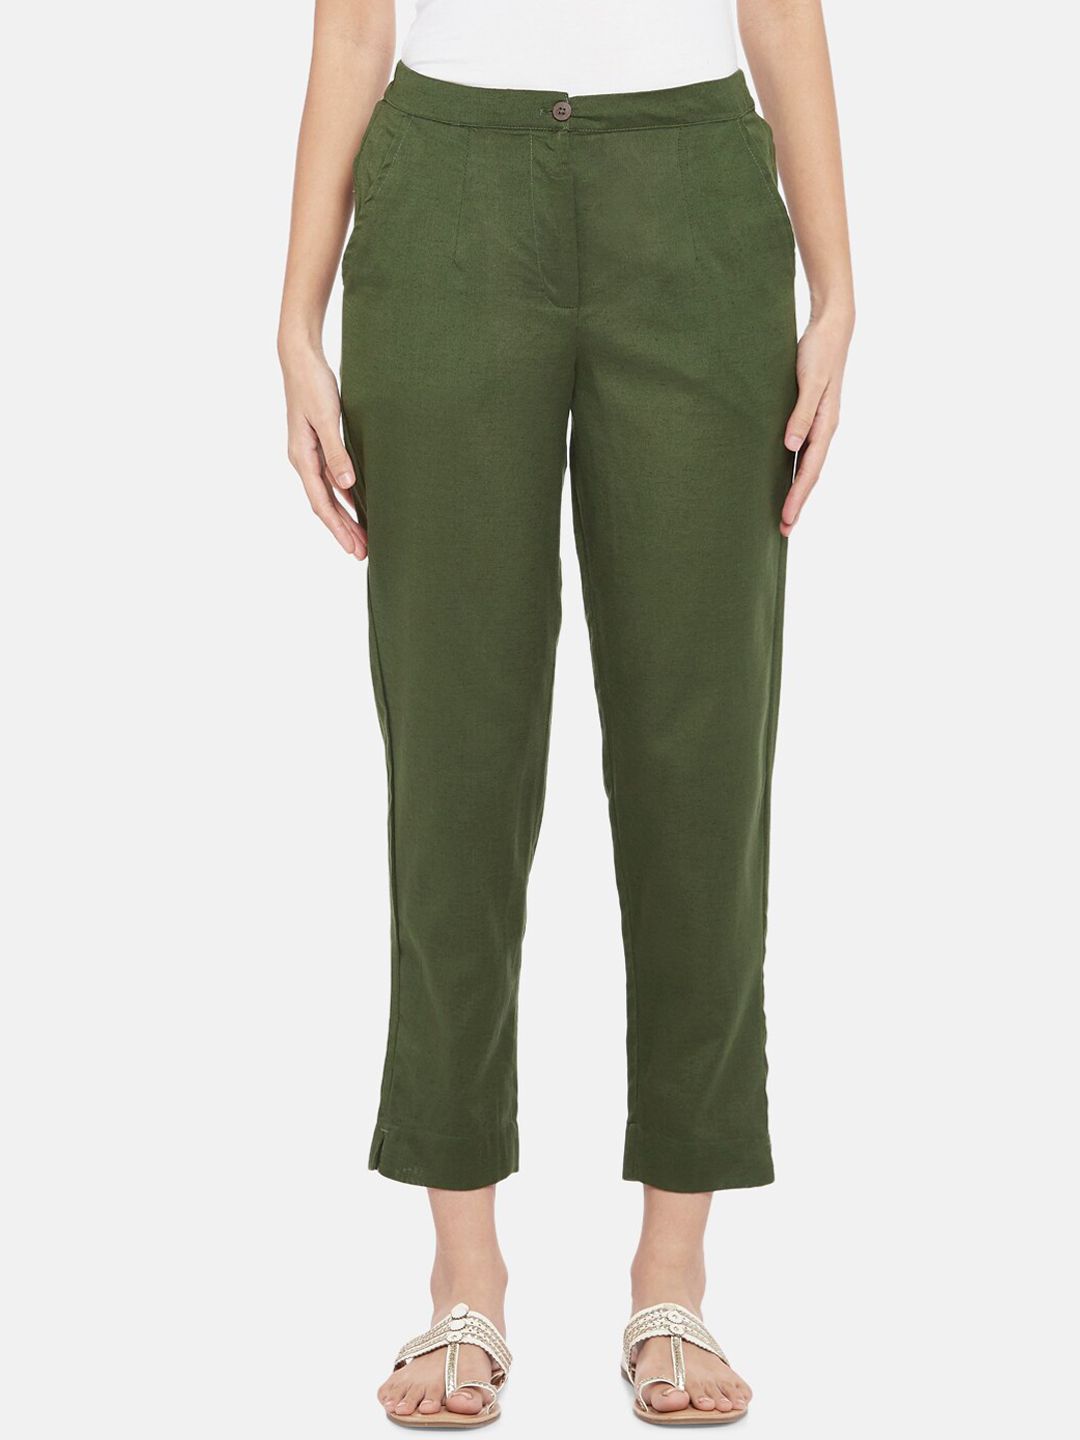 AKKRITI BY PANTALOONS Women Olive Green Solid  Regular Fit Trousers Price in India